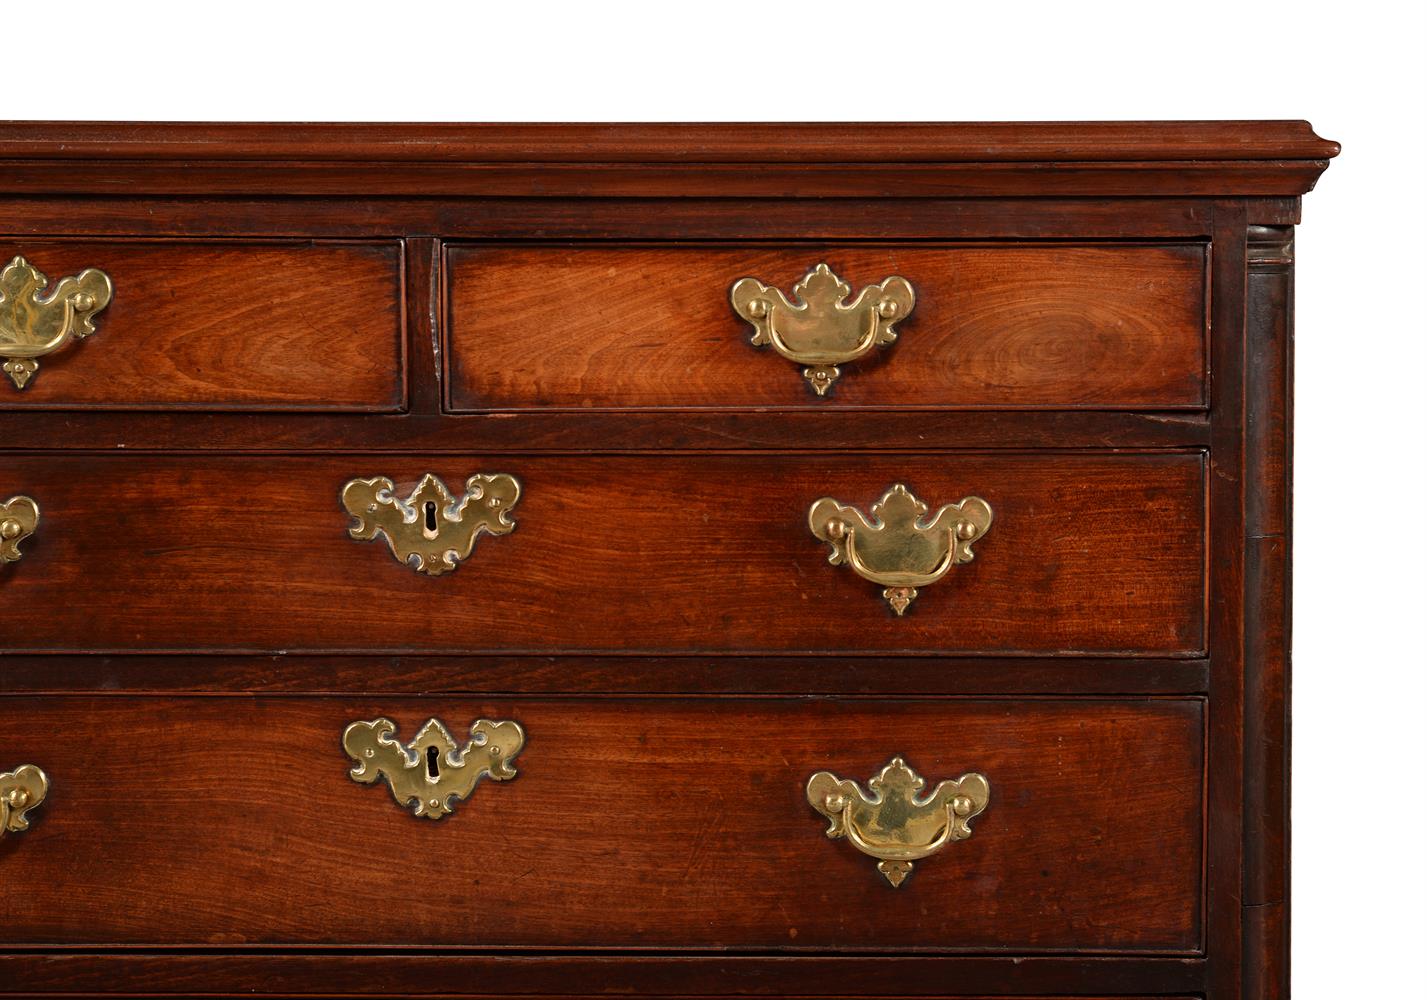 A GEORGE II MAHOGANY CHEST OF DRAWERS, PROBABLY NORTHERN ENGLAND, CIRCA 1750 - Image 2 of 3